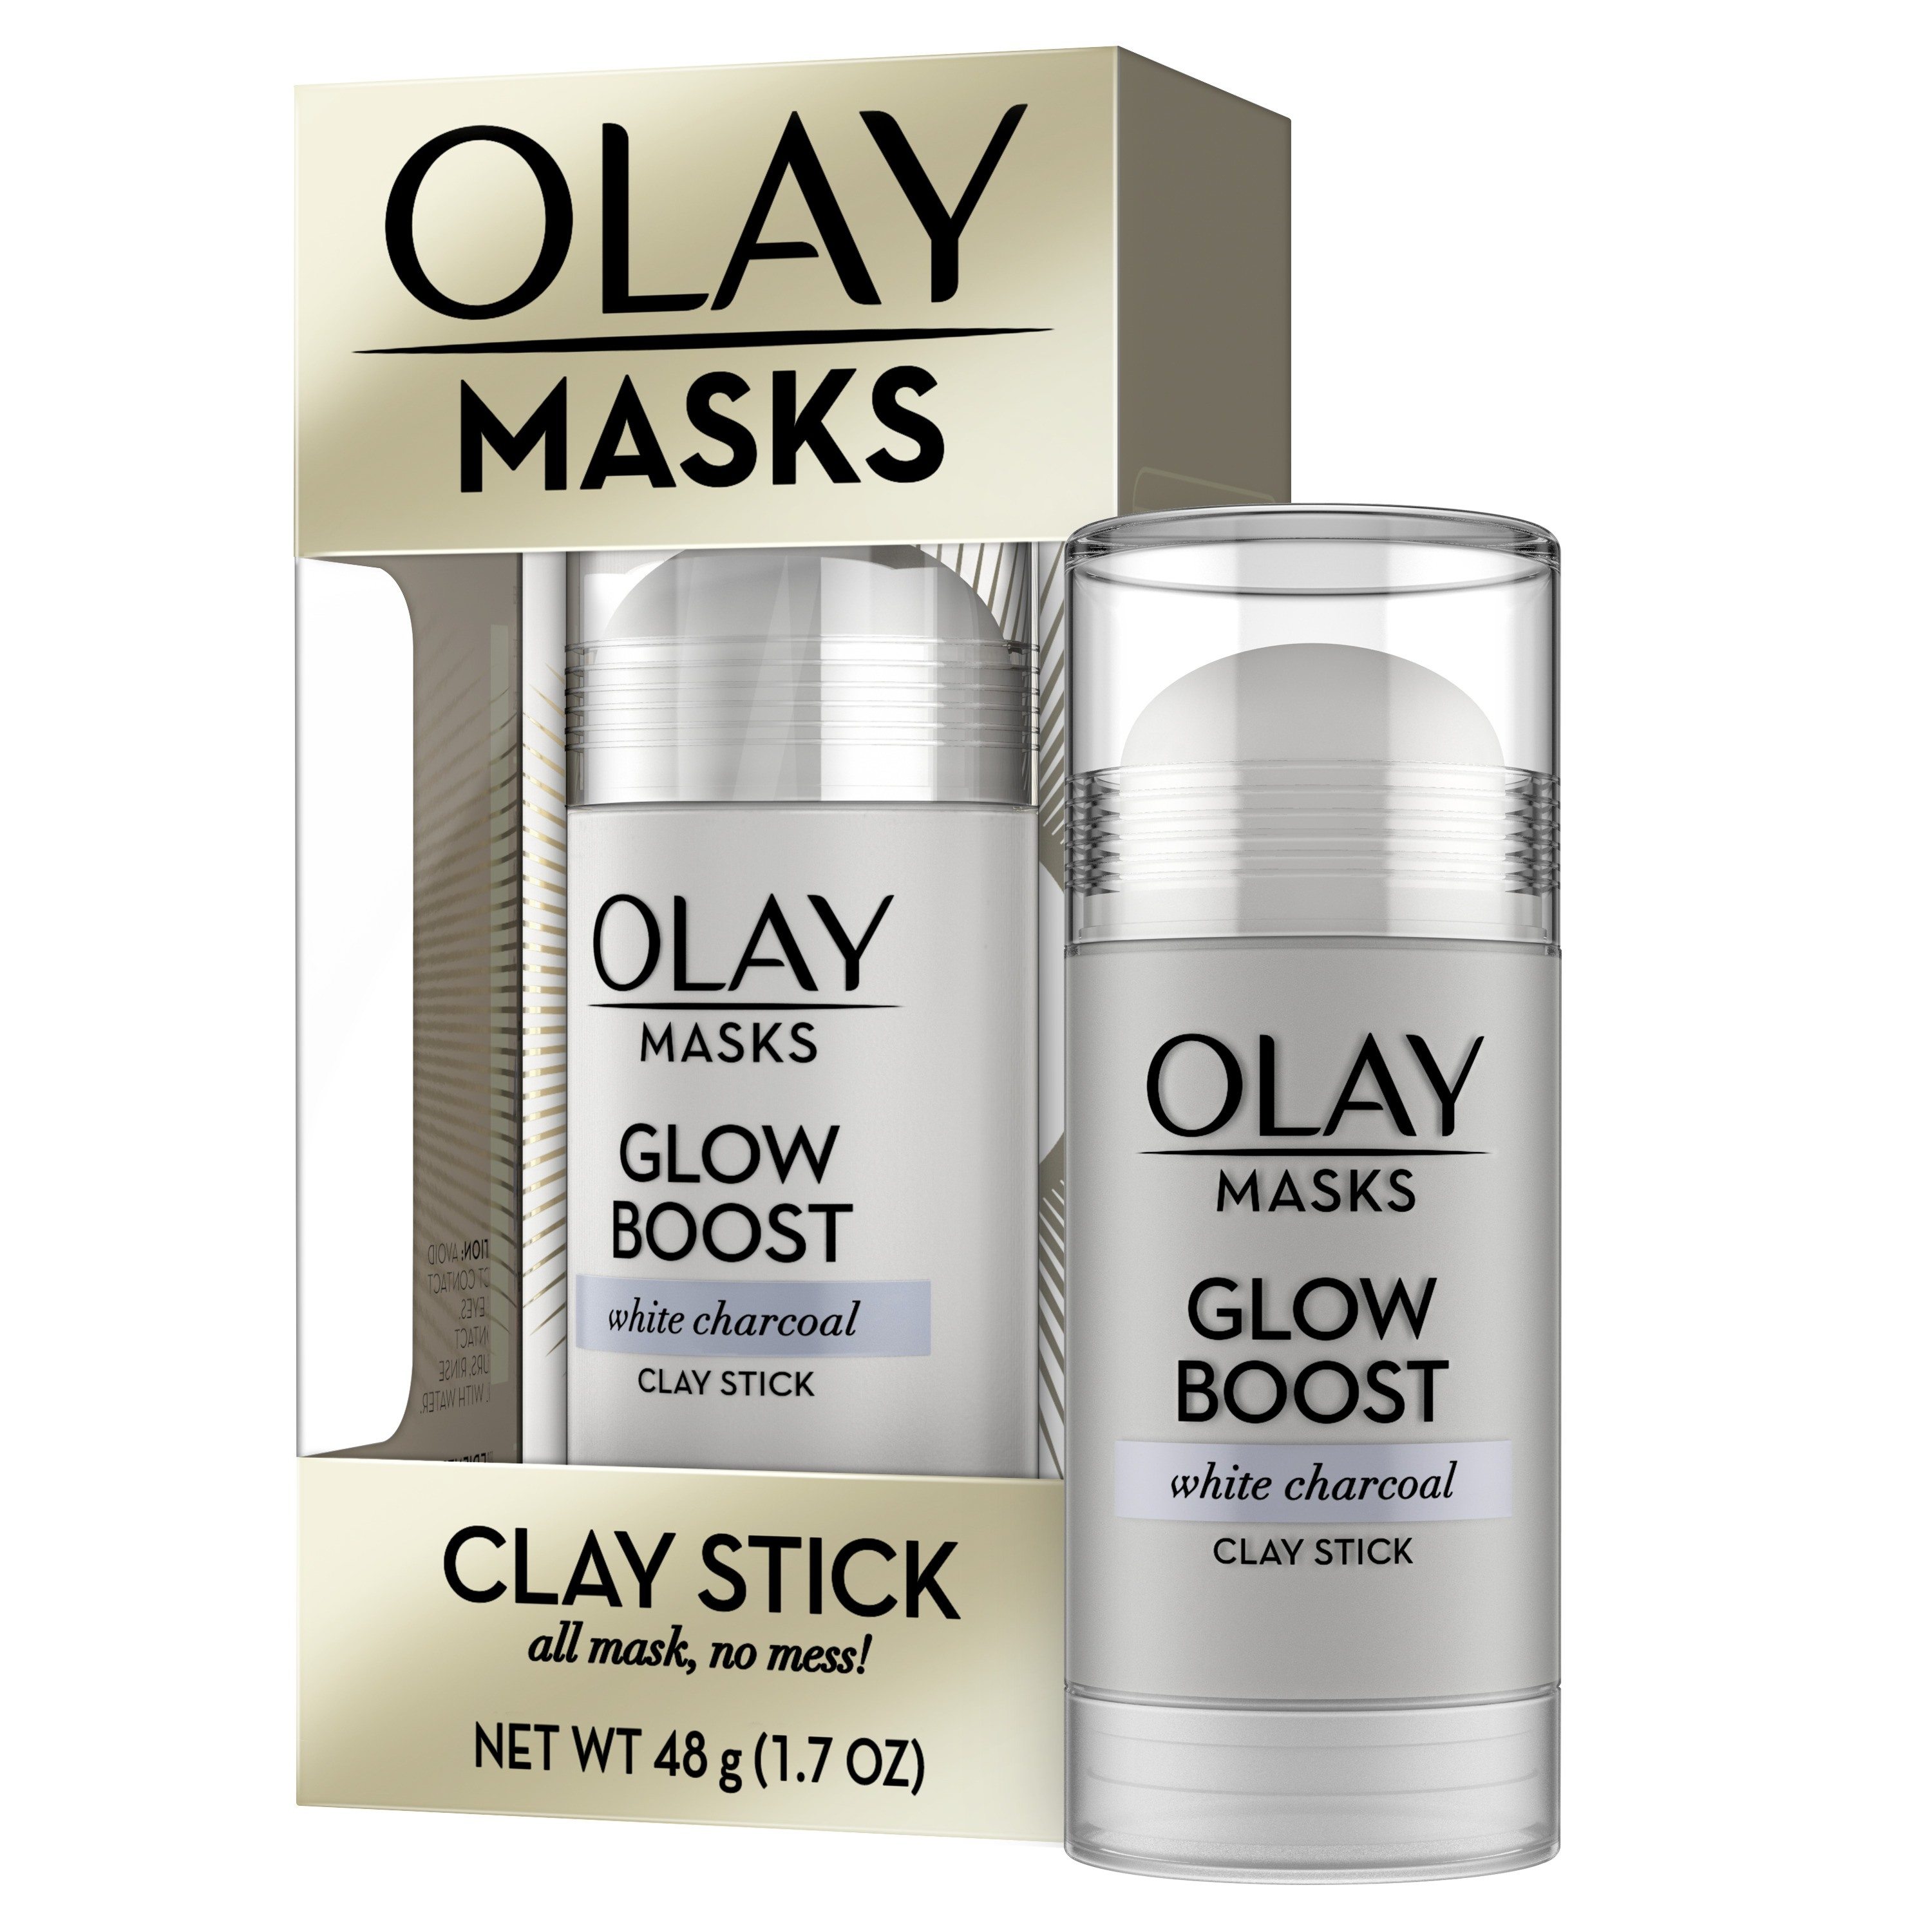 Olay Glow Boost White Charcoal Clay Face Mask Stick, 1.7 oz